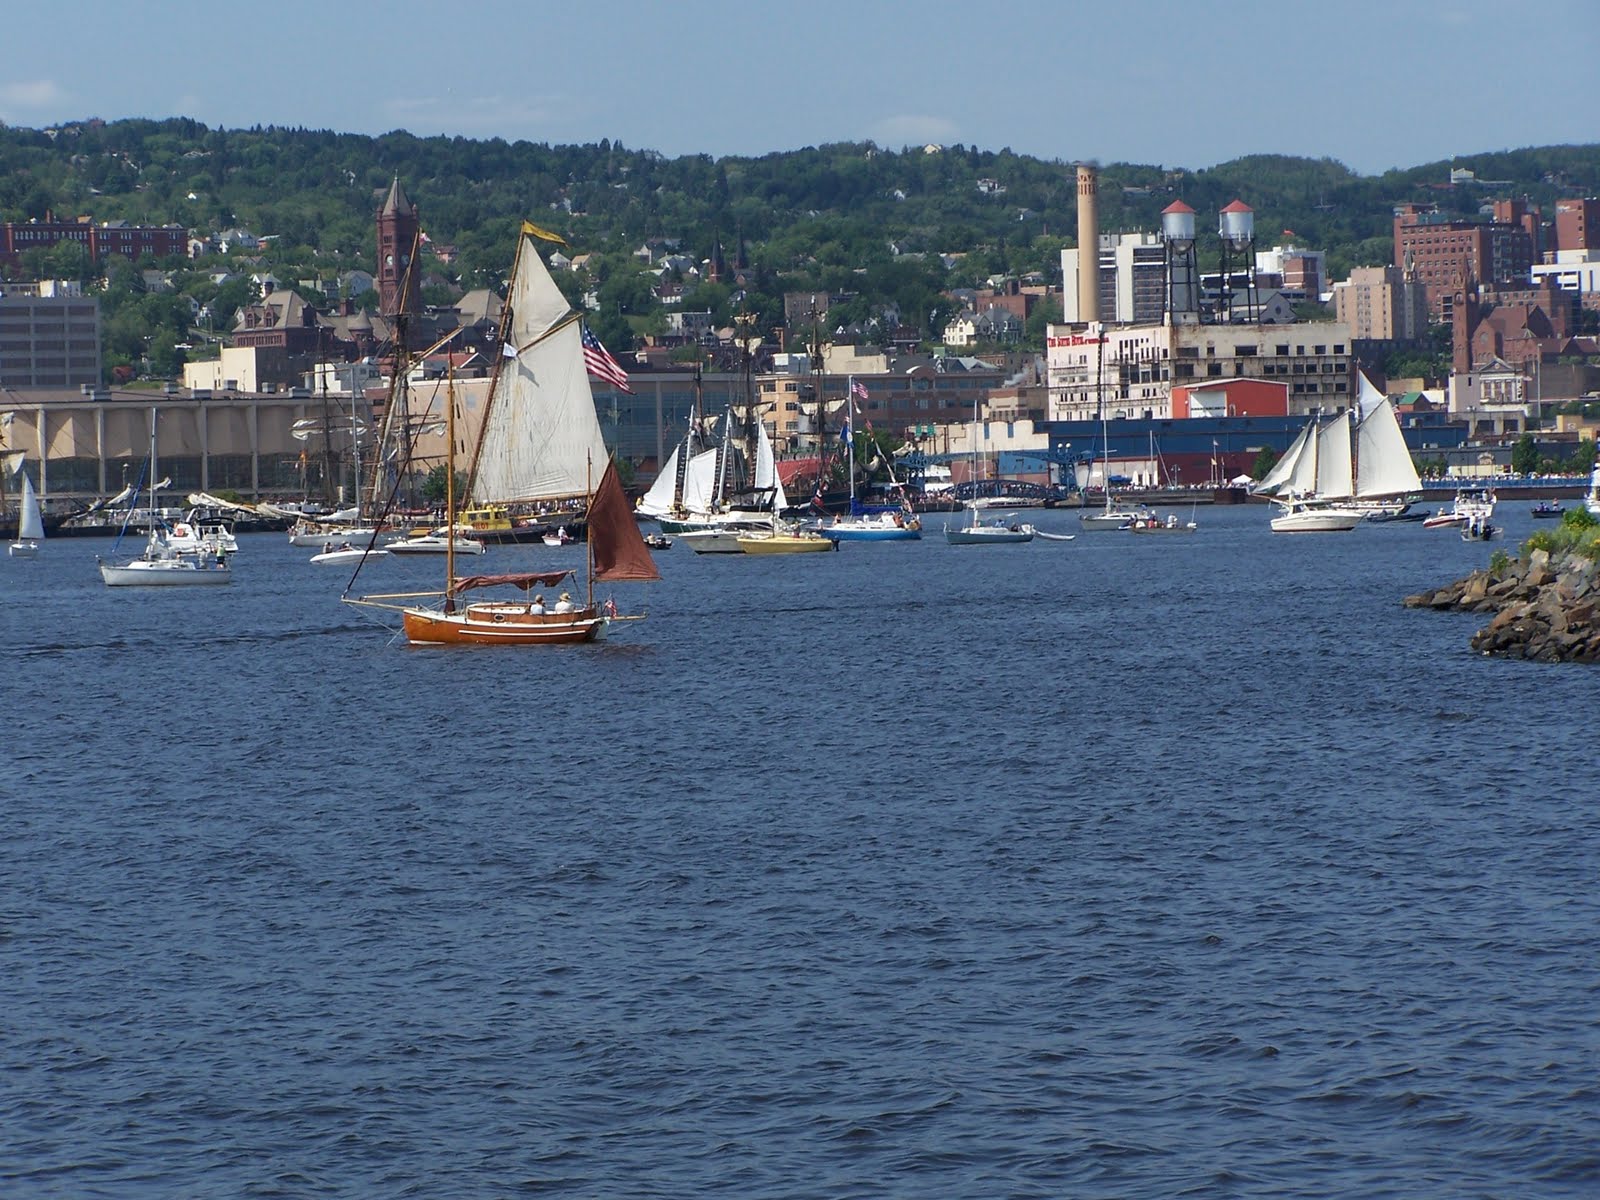  of the harbor and the fleet of boats with Duluth in the background